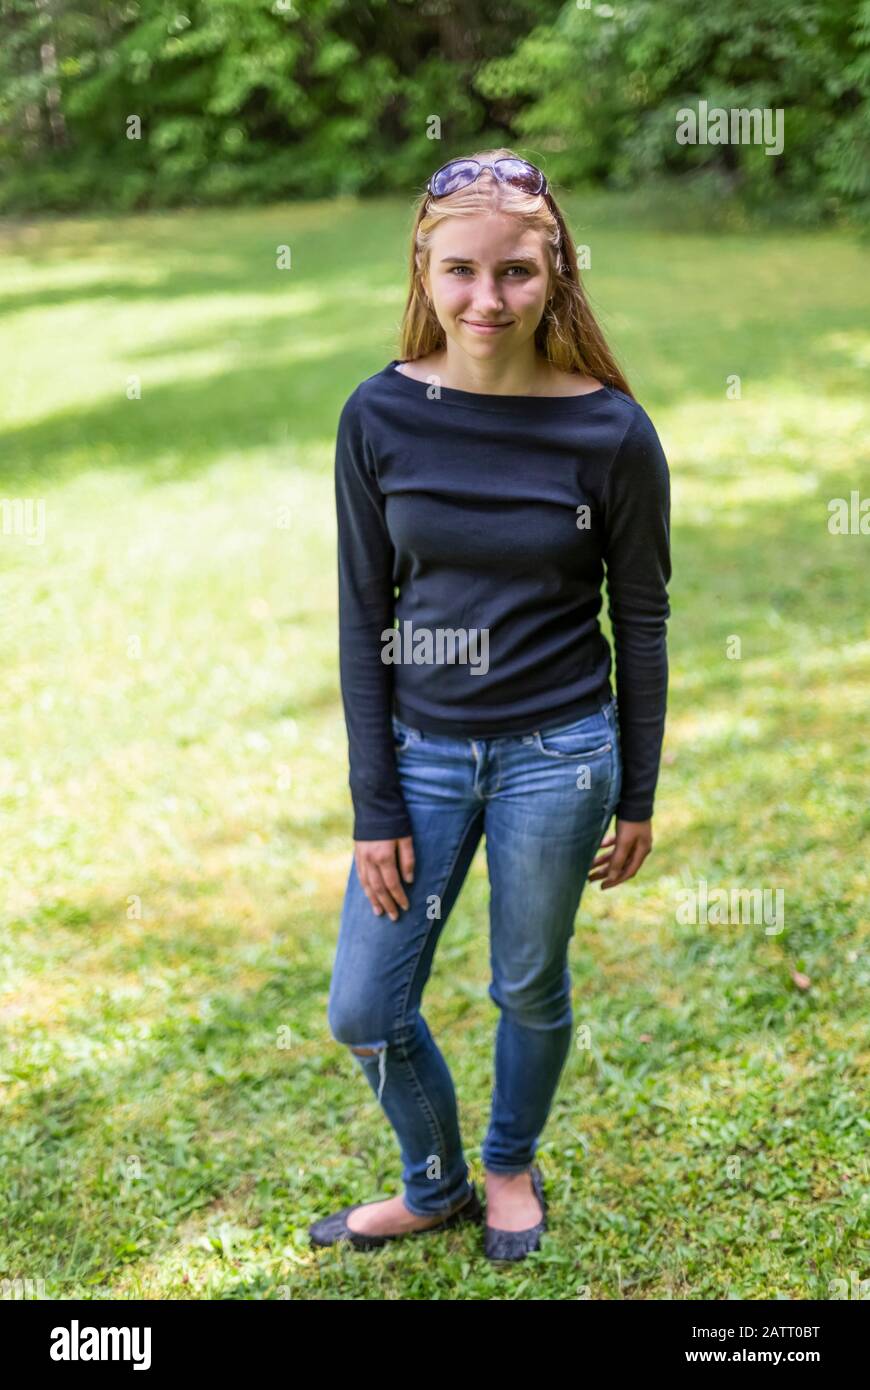 Portrait of a pre-teen girl standing on grass in a  park; Salmon Arm, British Columbia, Canada Stock Photo